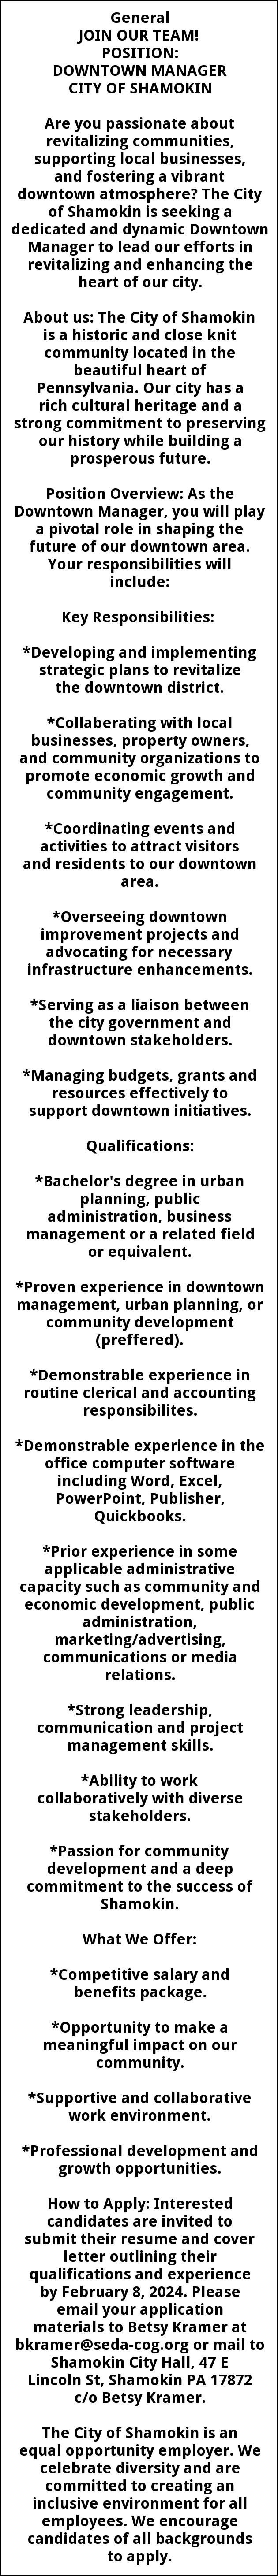 Downtown Manager